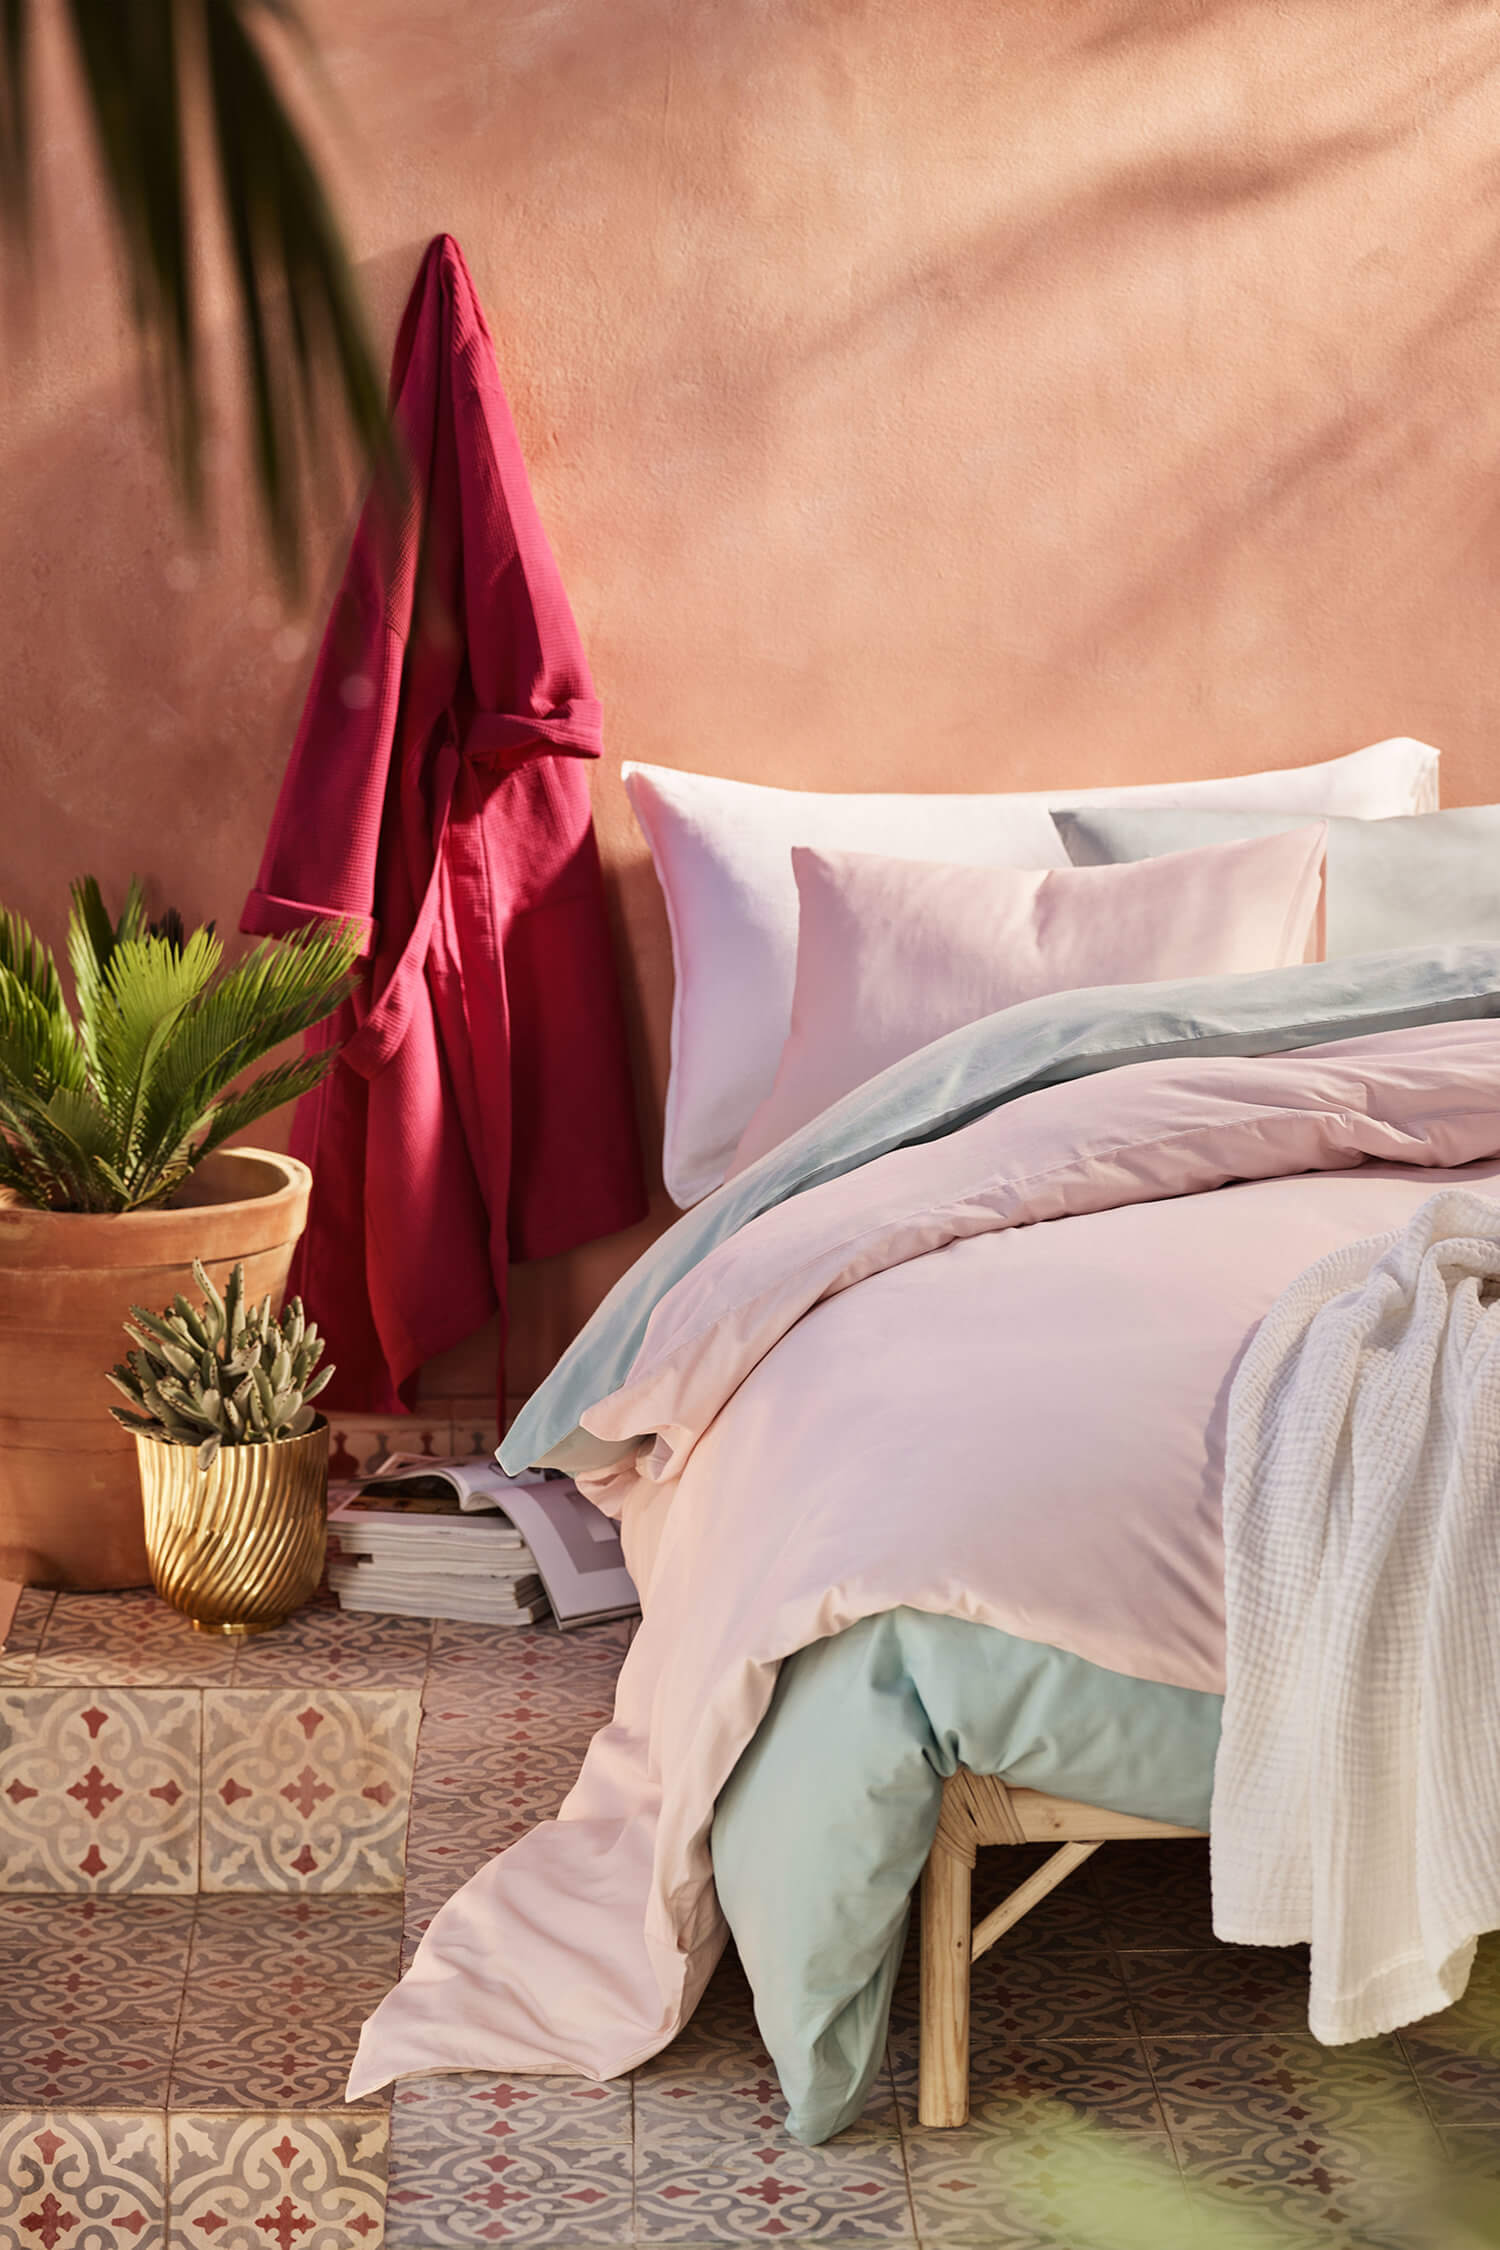 TheNordroom HMHomeSummerCollection20193 Colorful Opulence In The H&M Home Summer Collection 2019